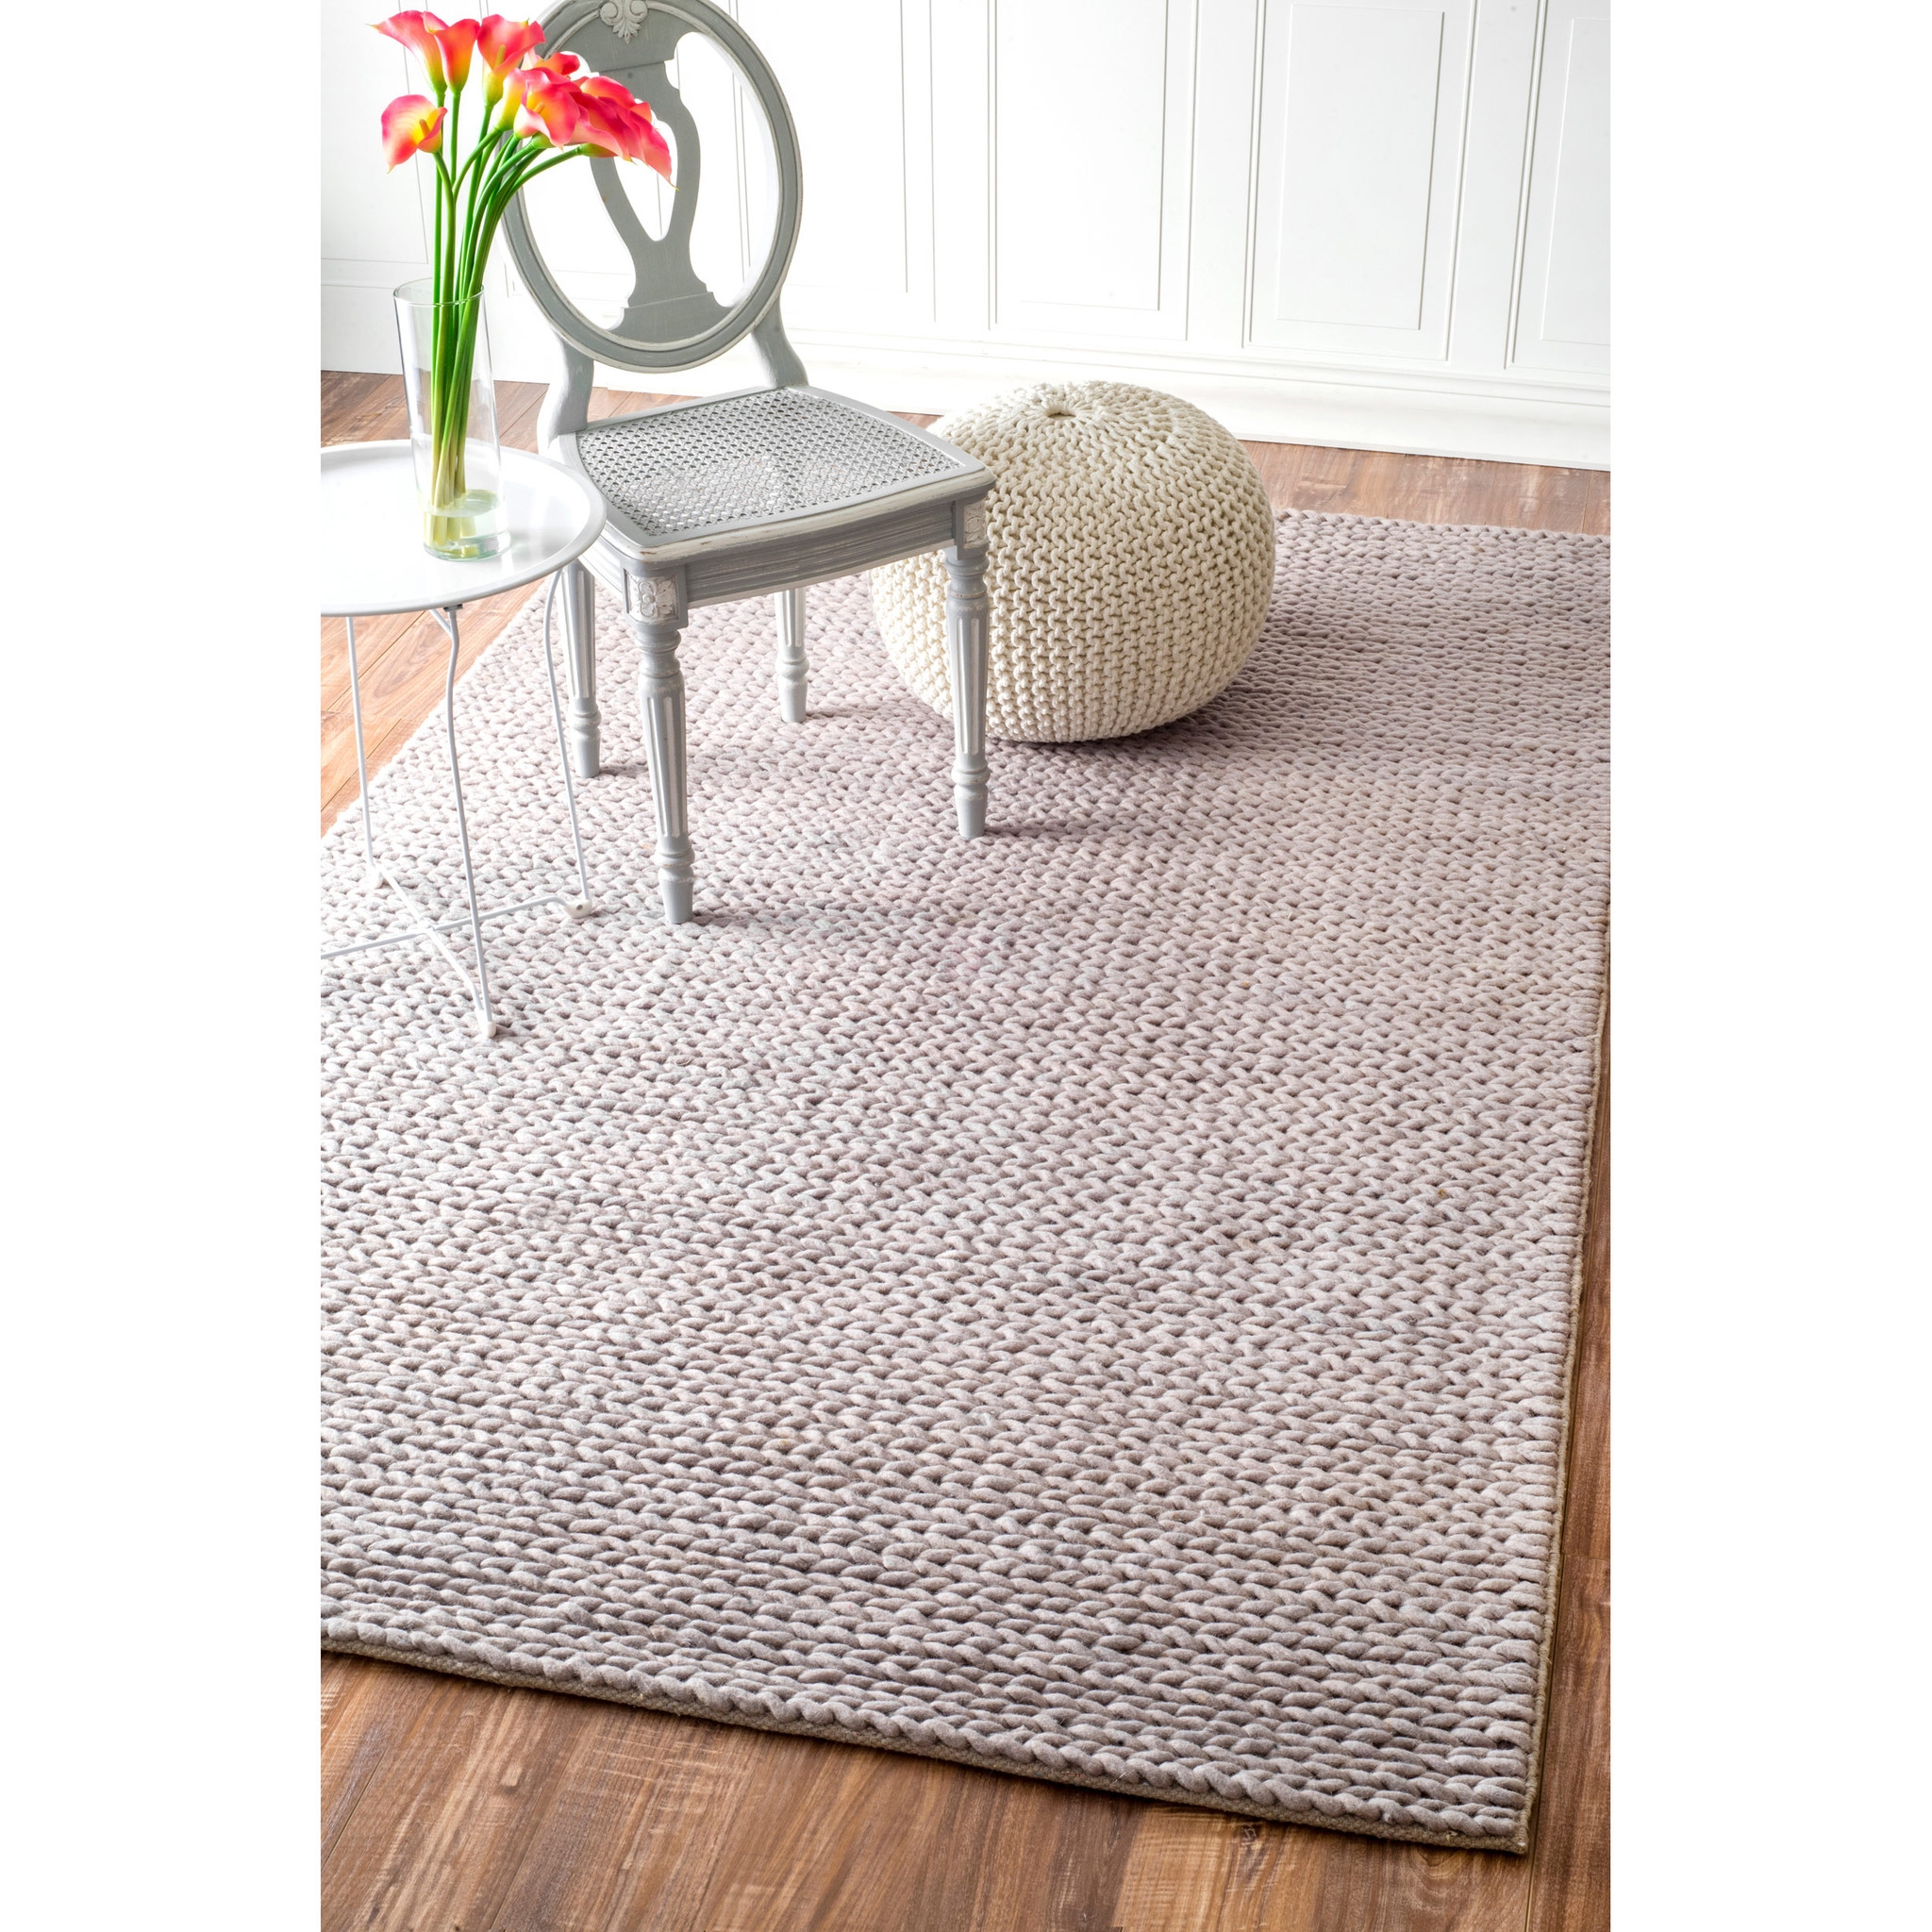 Hand Woven Chunky Woolen Cable Rug - 5'x8' - Image 1